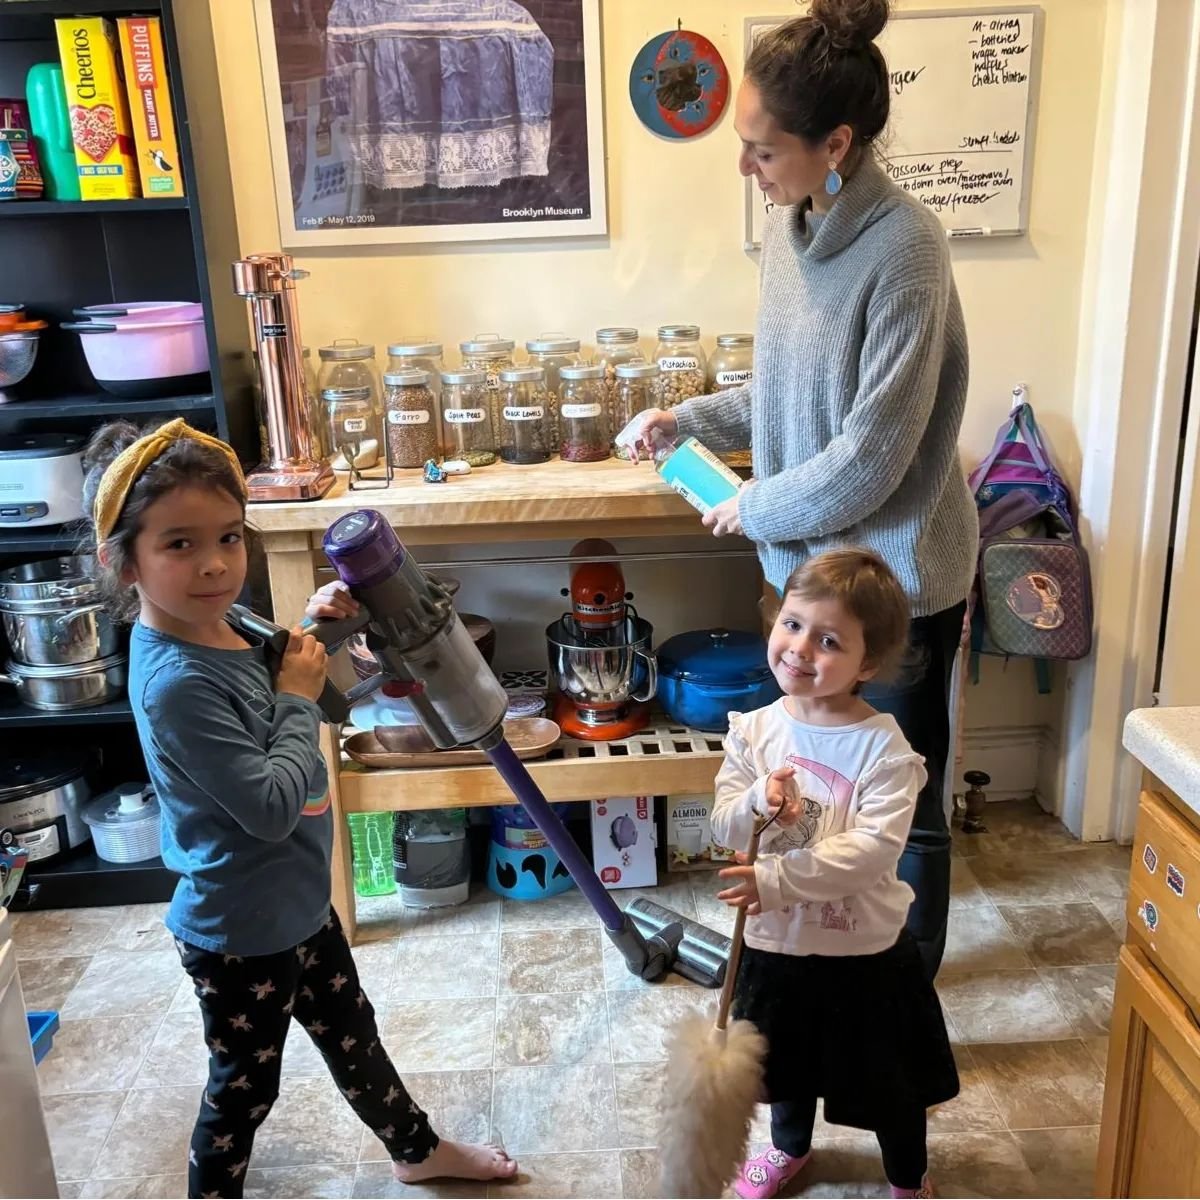 Ashreynu is busy preparing for Shabbat HaGadol and cleaning for Pesach from our littlest sweepers to our expert shopping cart drivers at a Kosher supermarket on a Friday before Pesach! Check back on Sunday night for Bedikat Chameitz updates! Shabbat 